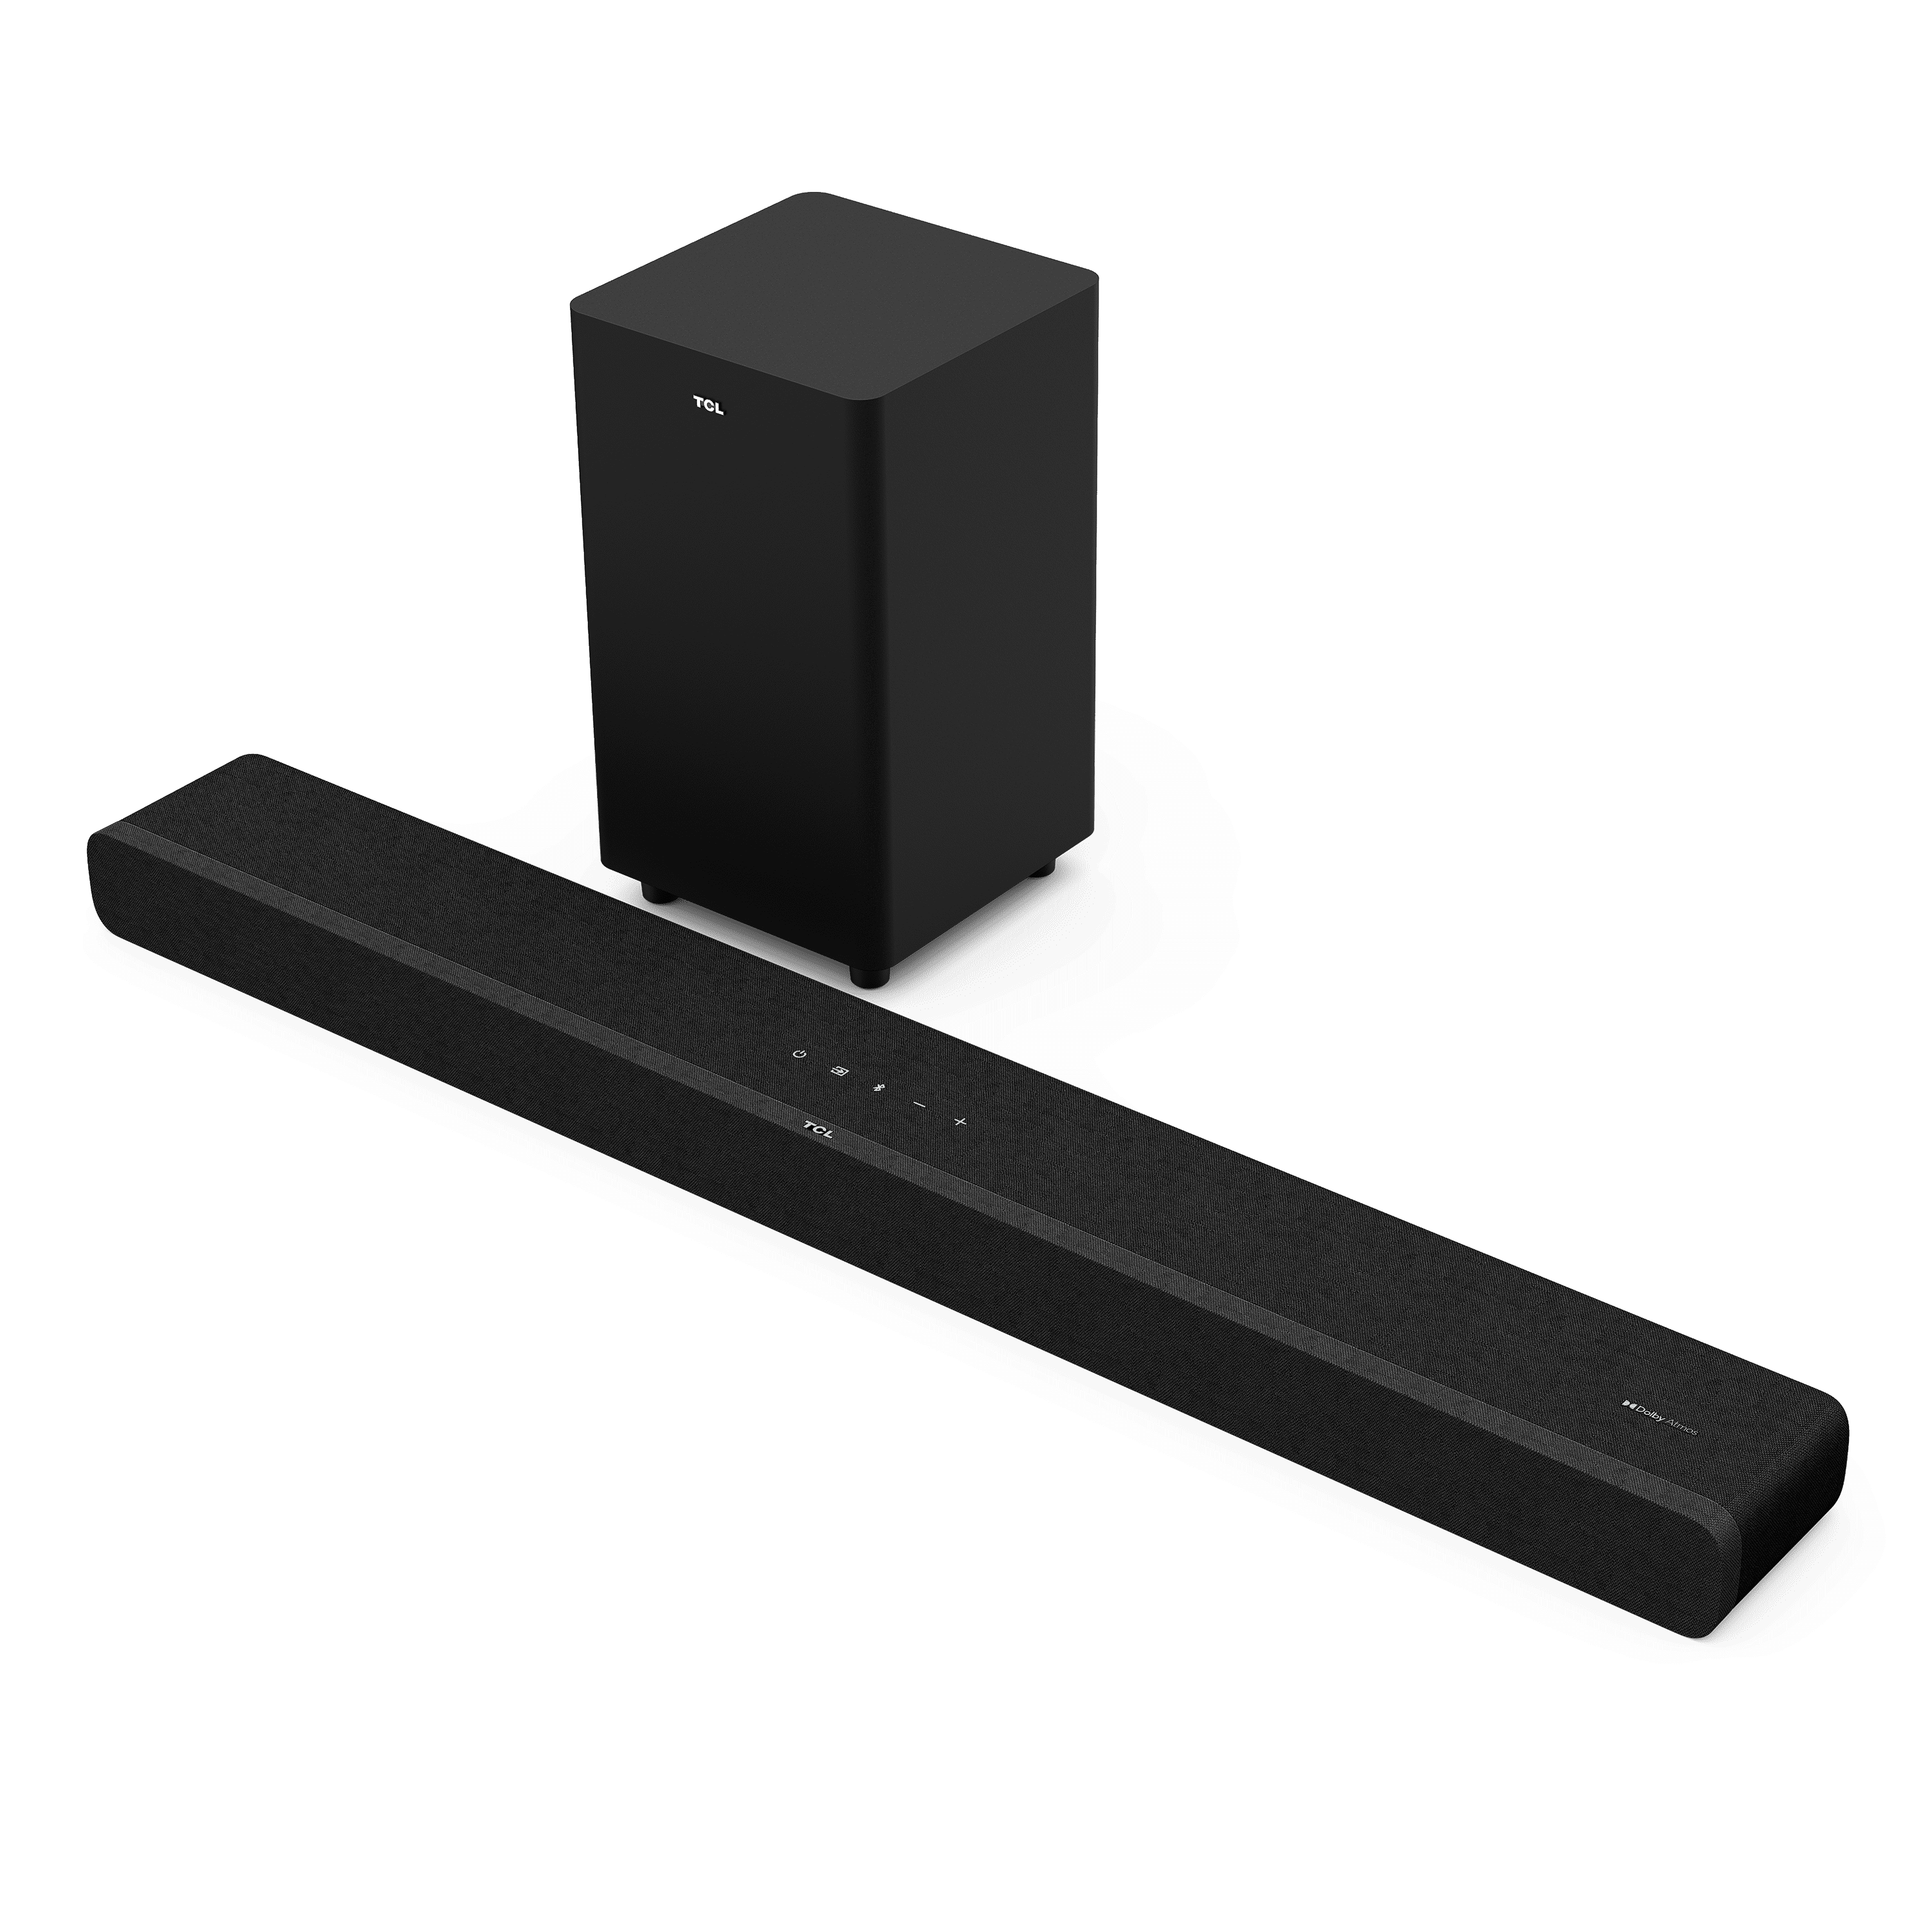 Select Walmart Stores: TCL Alto 8+ Dolby Atmos 3.1.2 Channel Sound Bar w/ Wireless Subwoofer $99 + Free Store Pickup